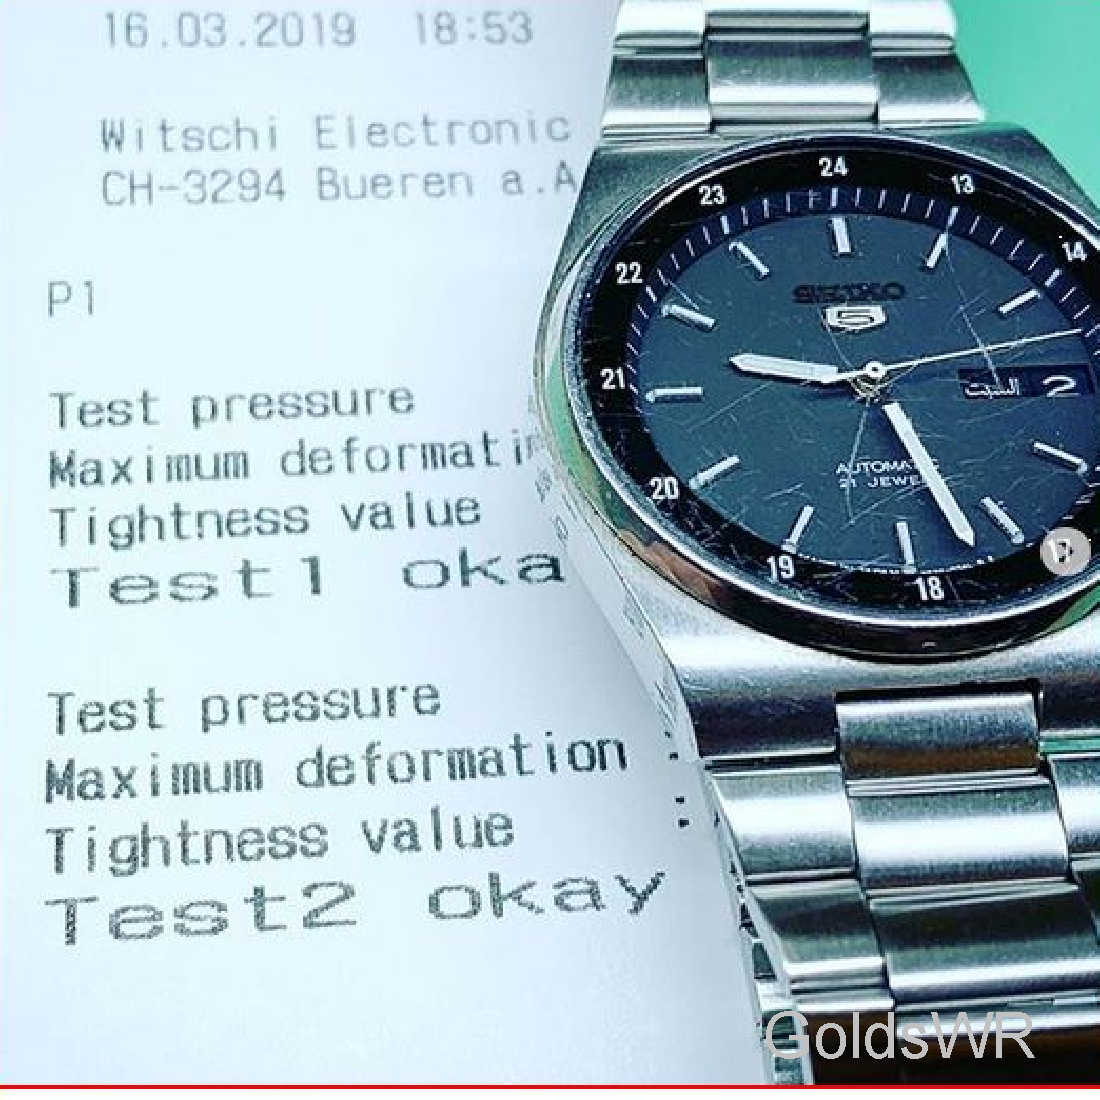 Seiko watch sealed and pressure tested